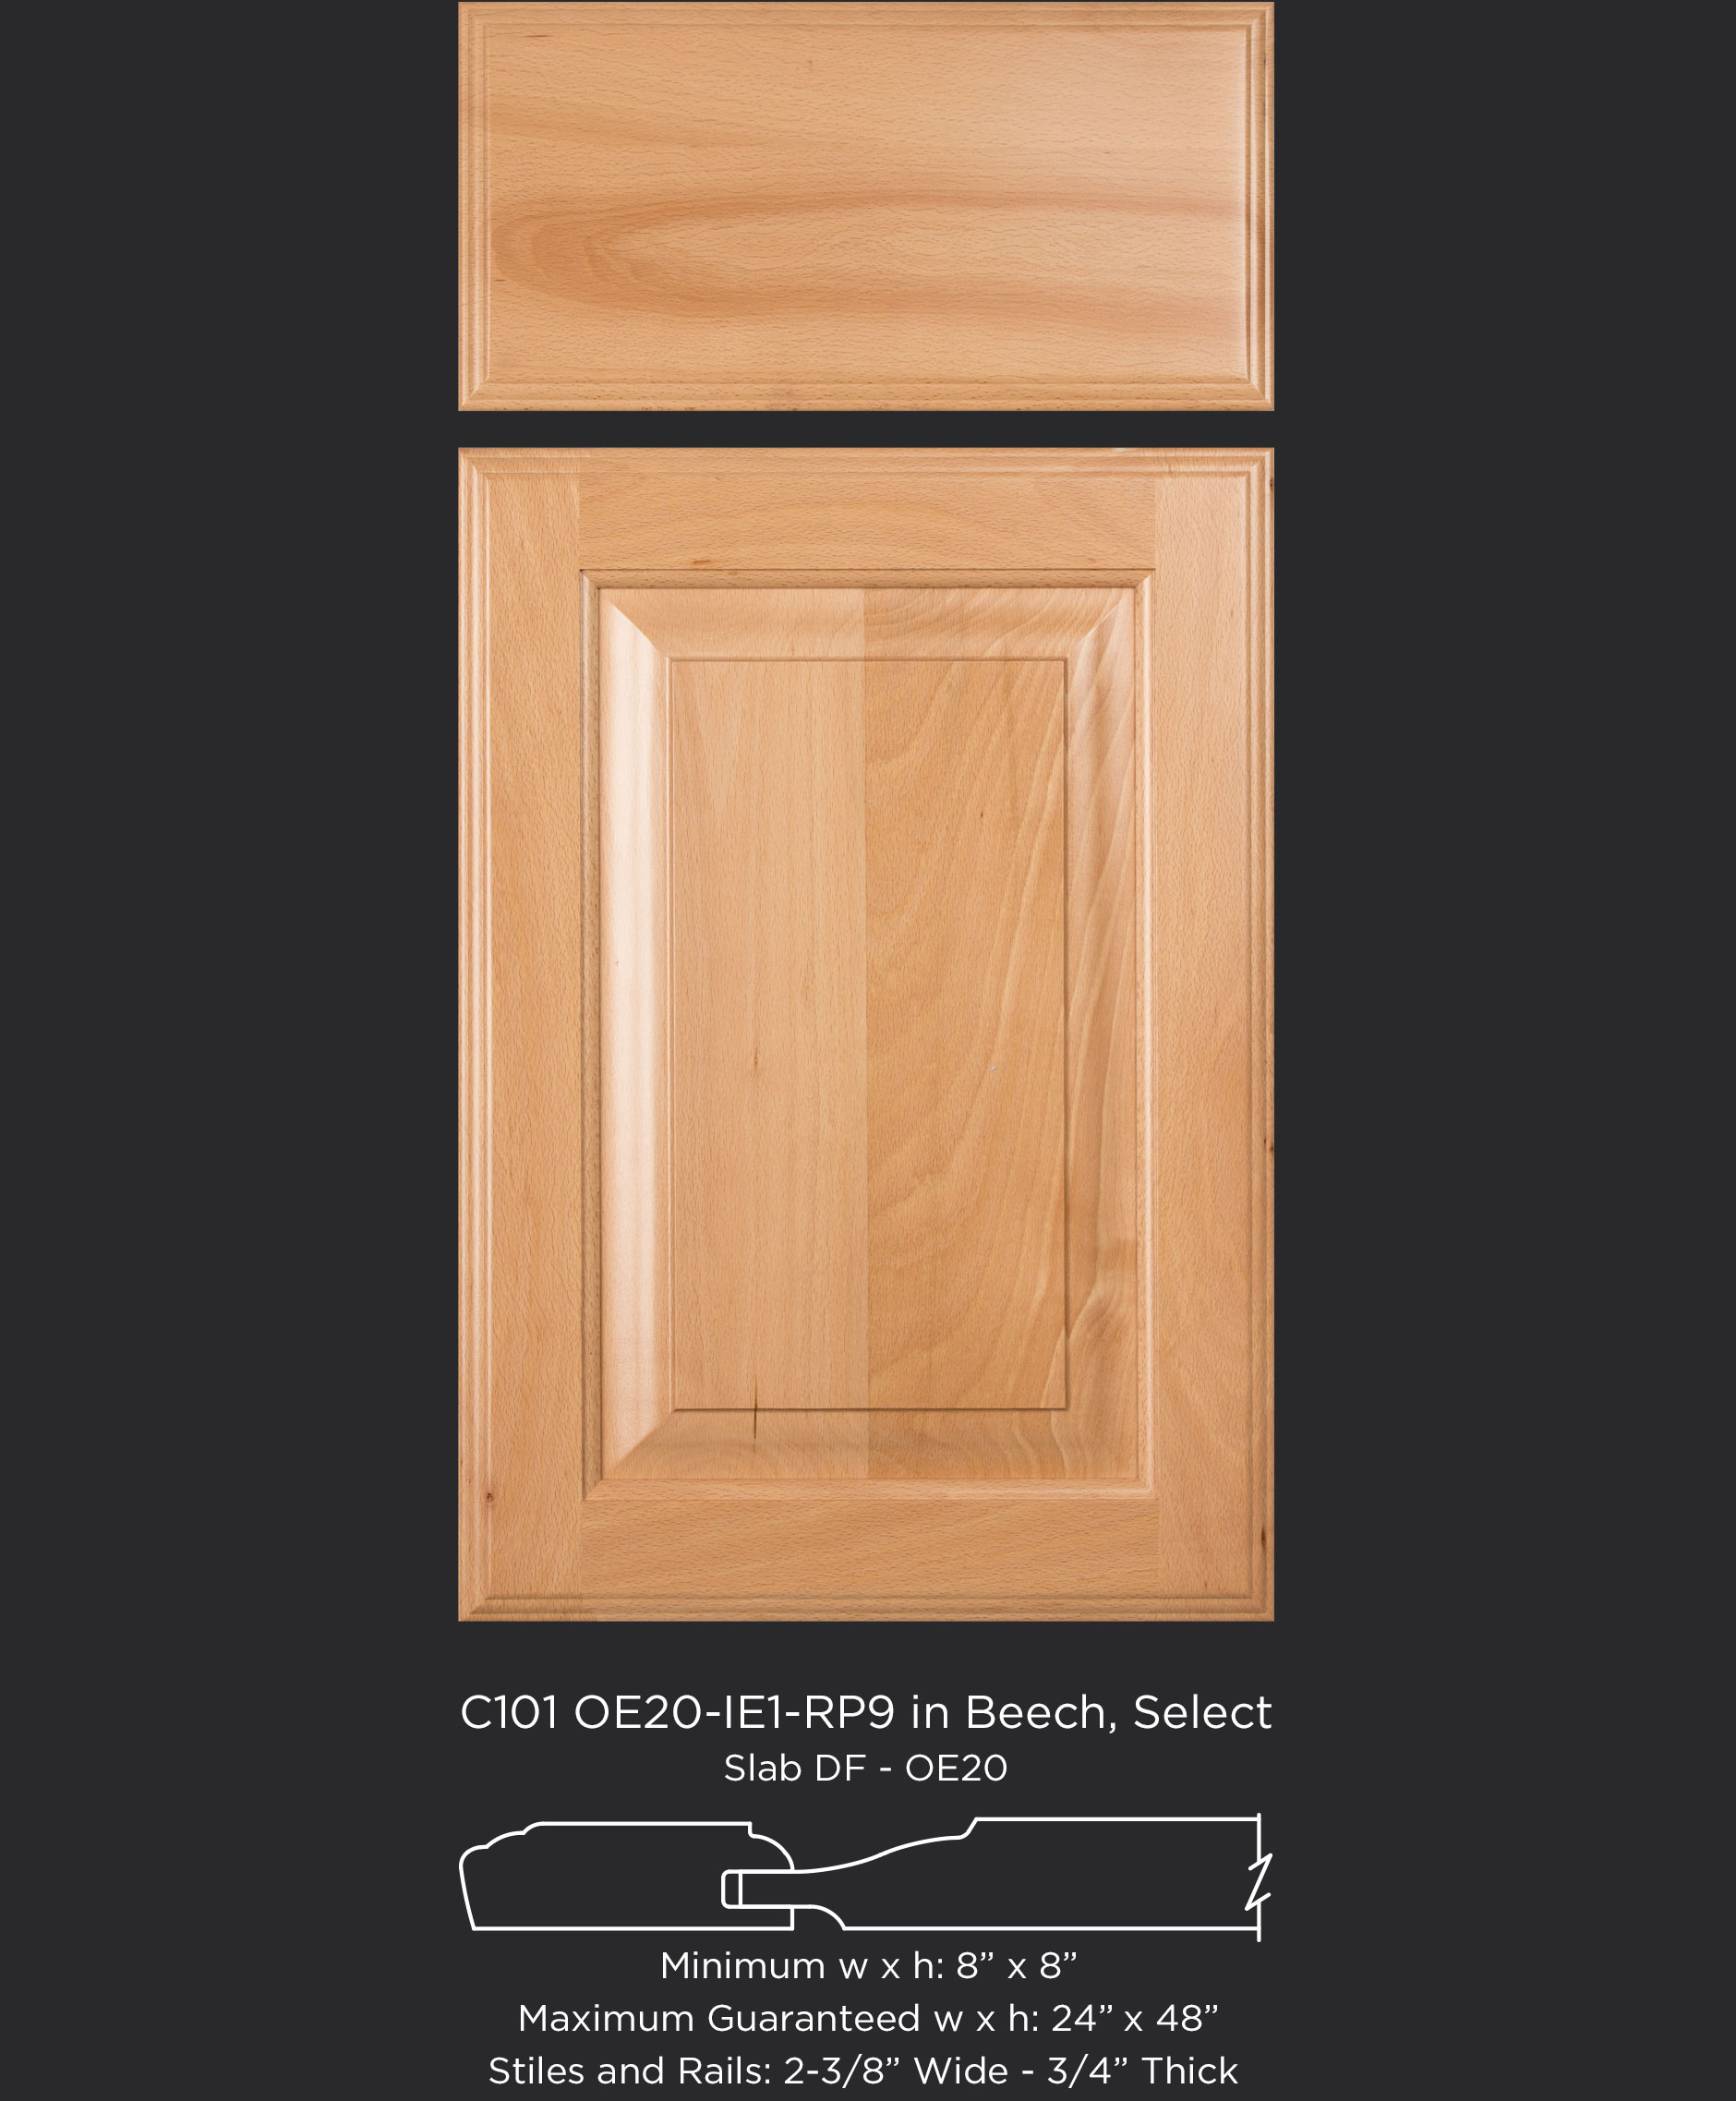 Cope and Stick Cabinet Door C101 OE20-IE1-RP9 Beech Select